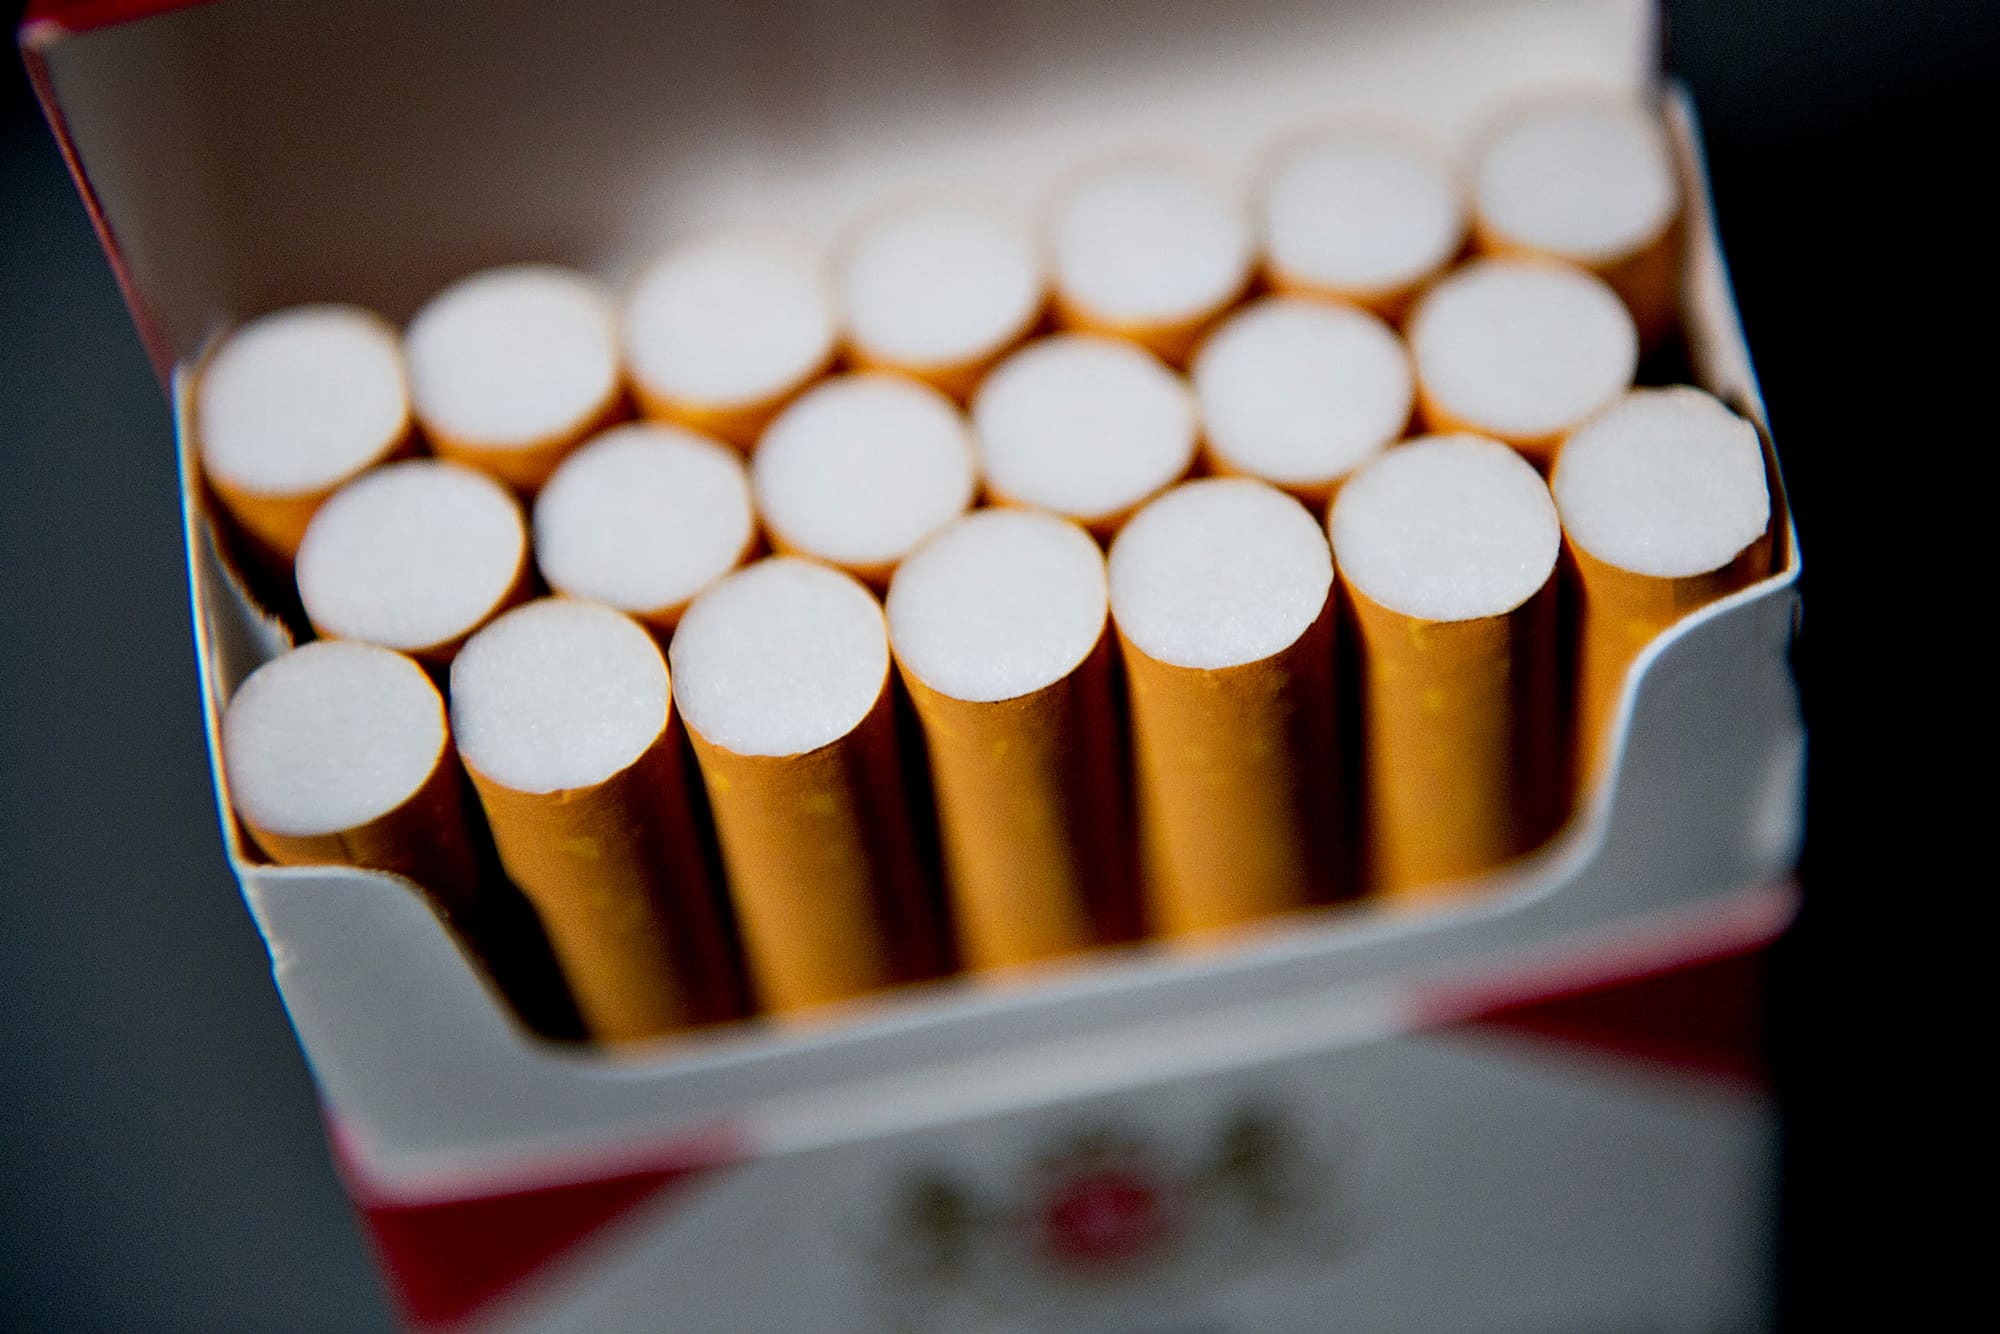 Altria said transport from the cigarette industry had flattened by 2020